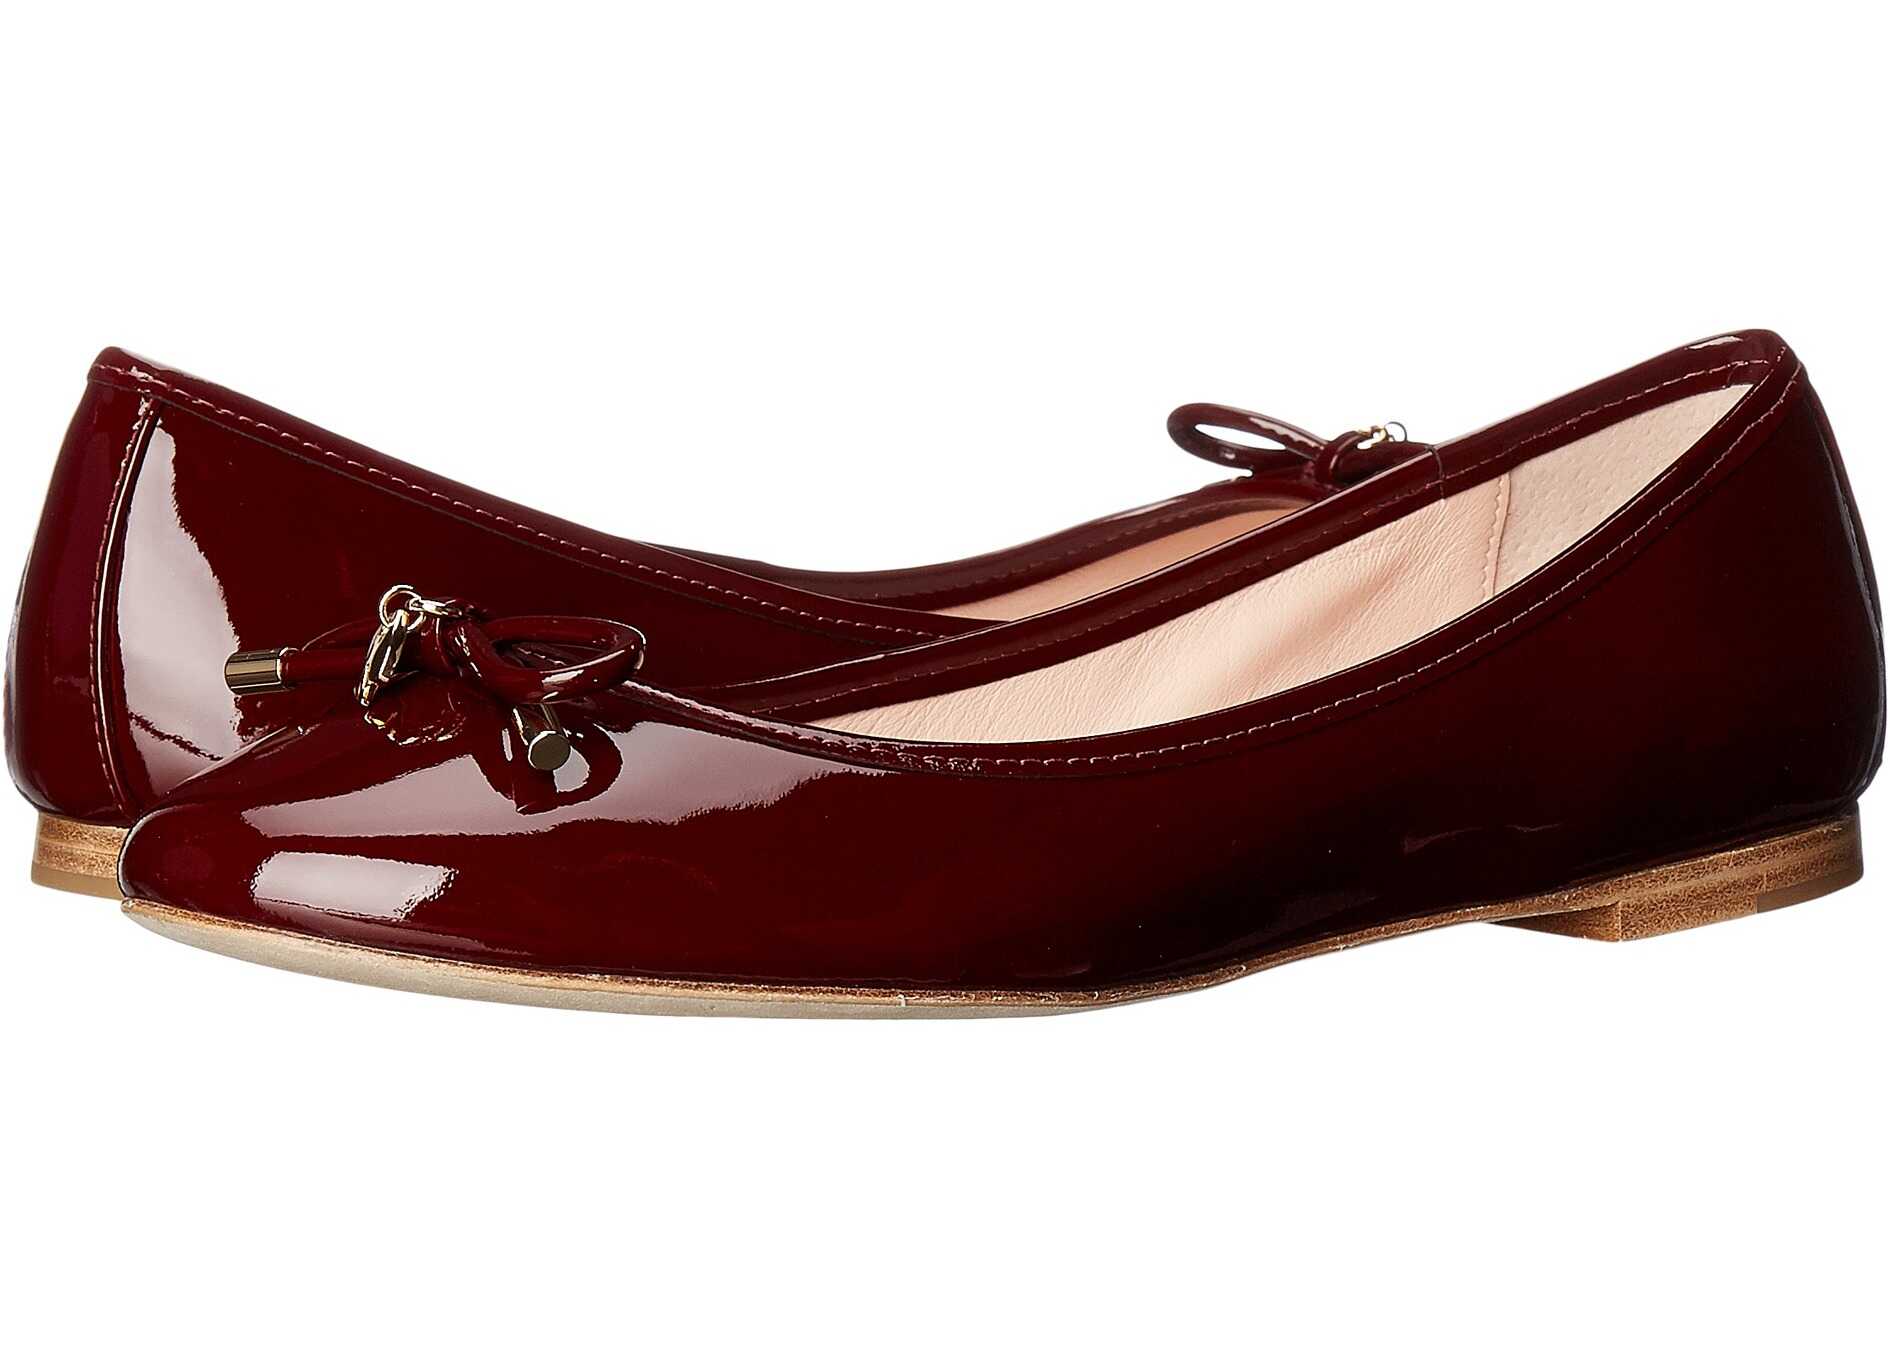 Kate Spade New York Willa Red Chestnut Patent